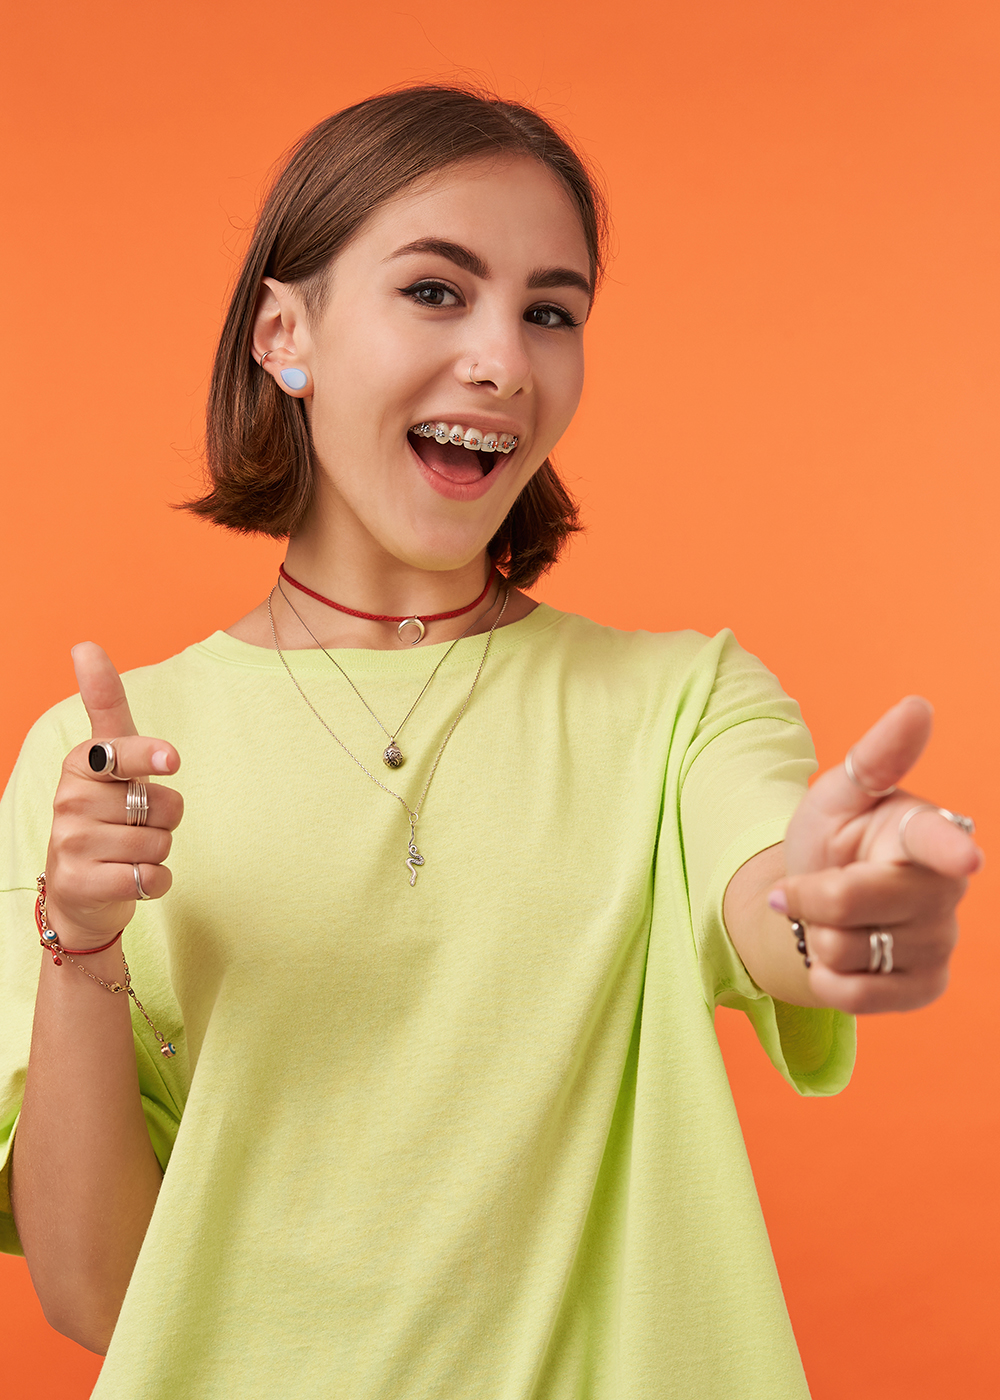 Girl wearing traditional braces doing finger guns at the camera